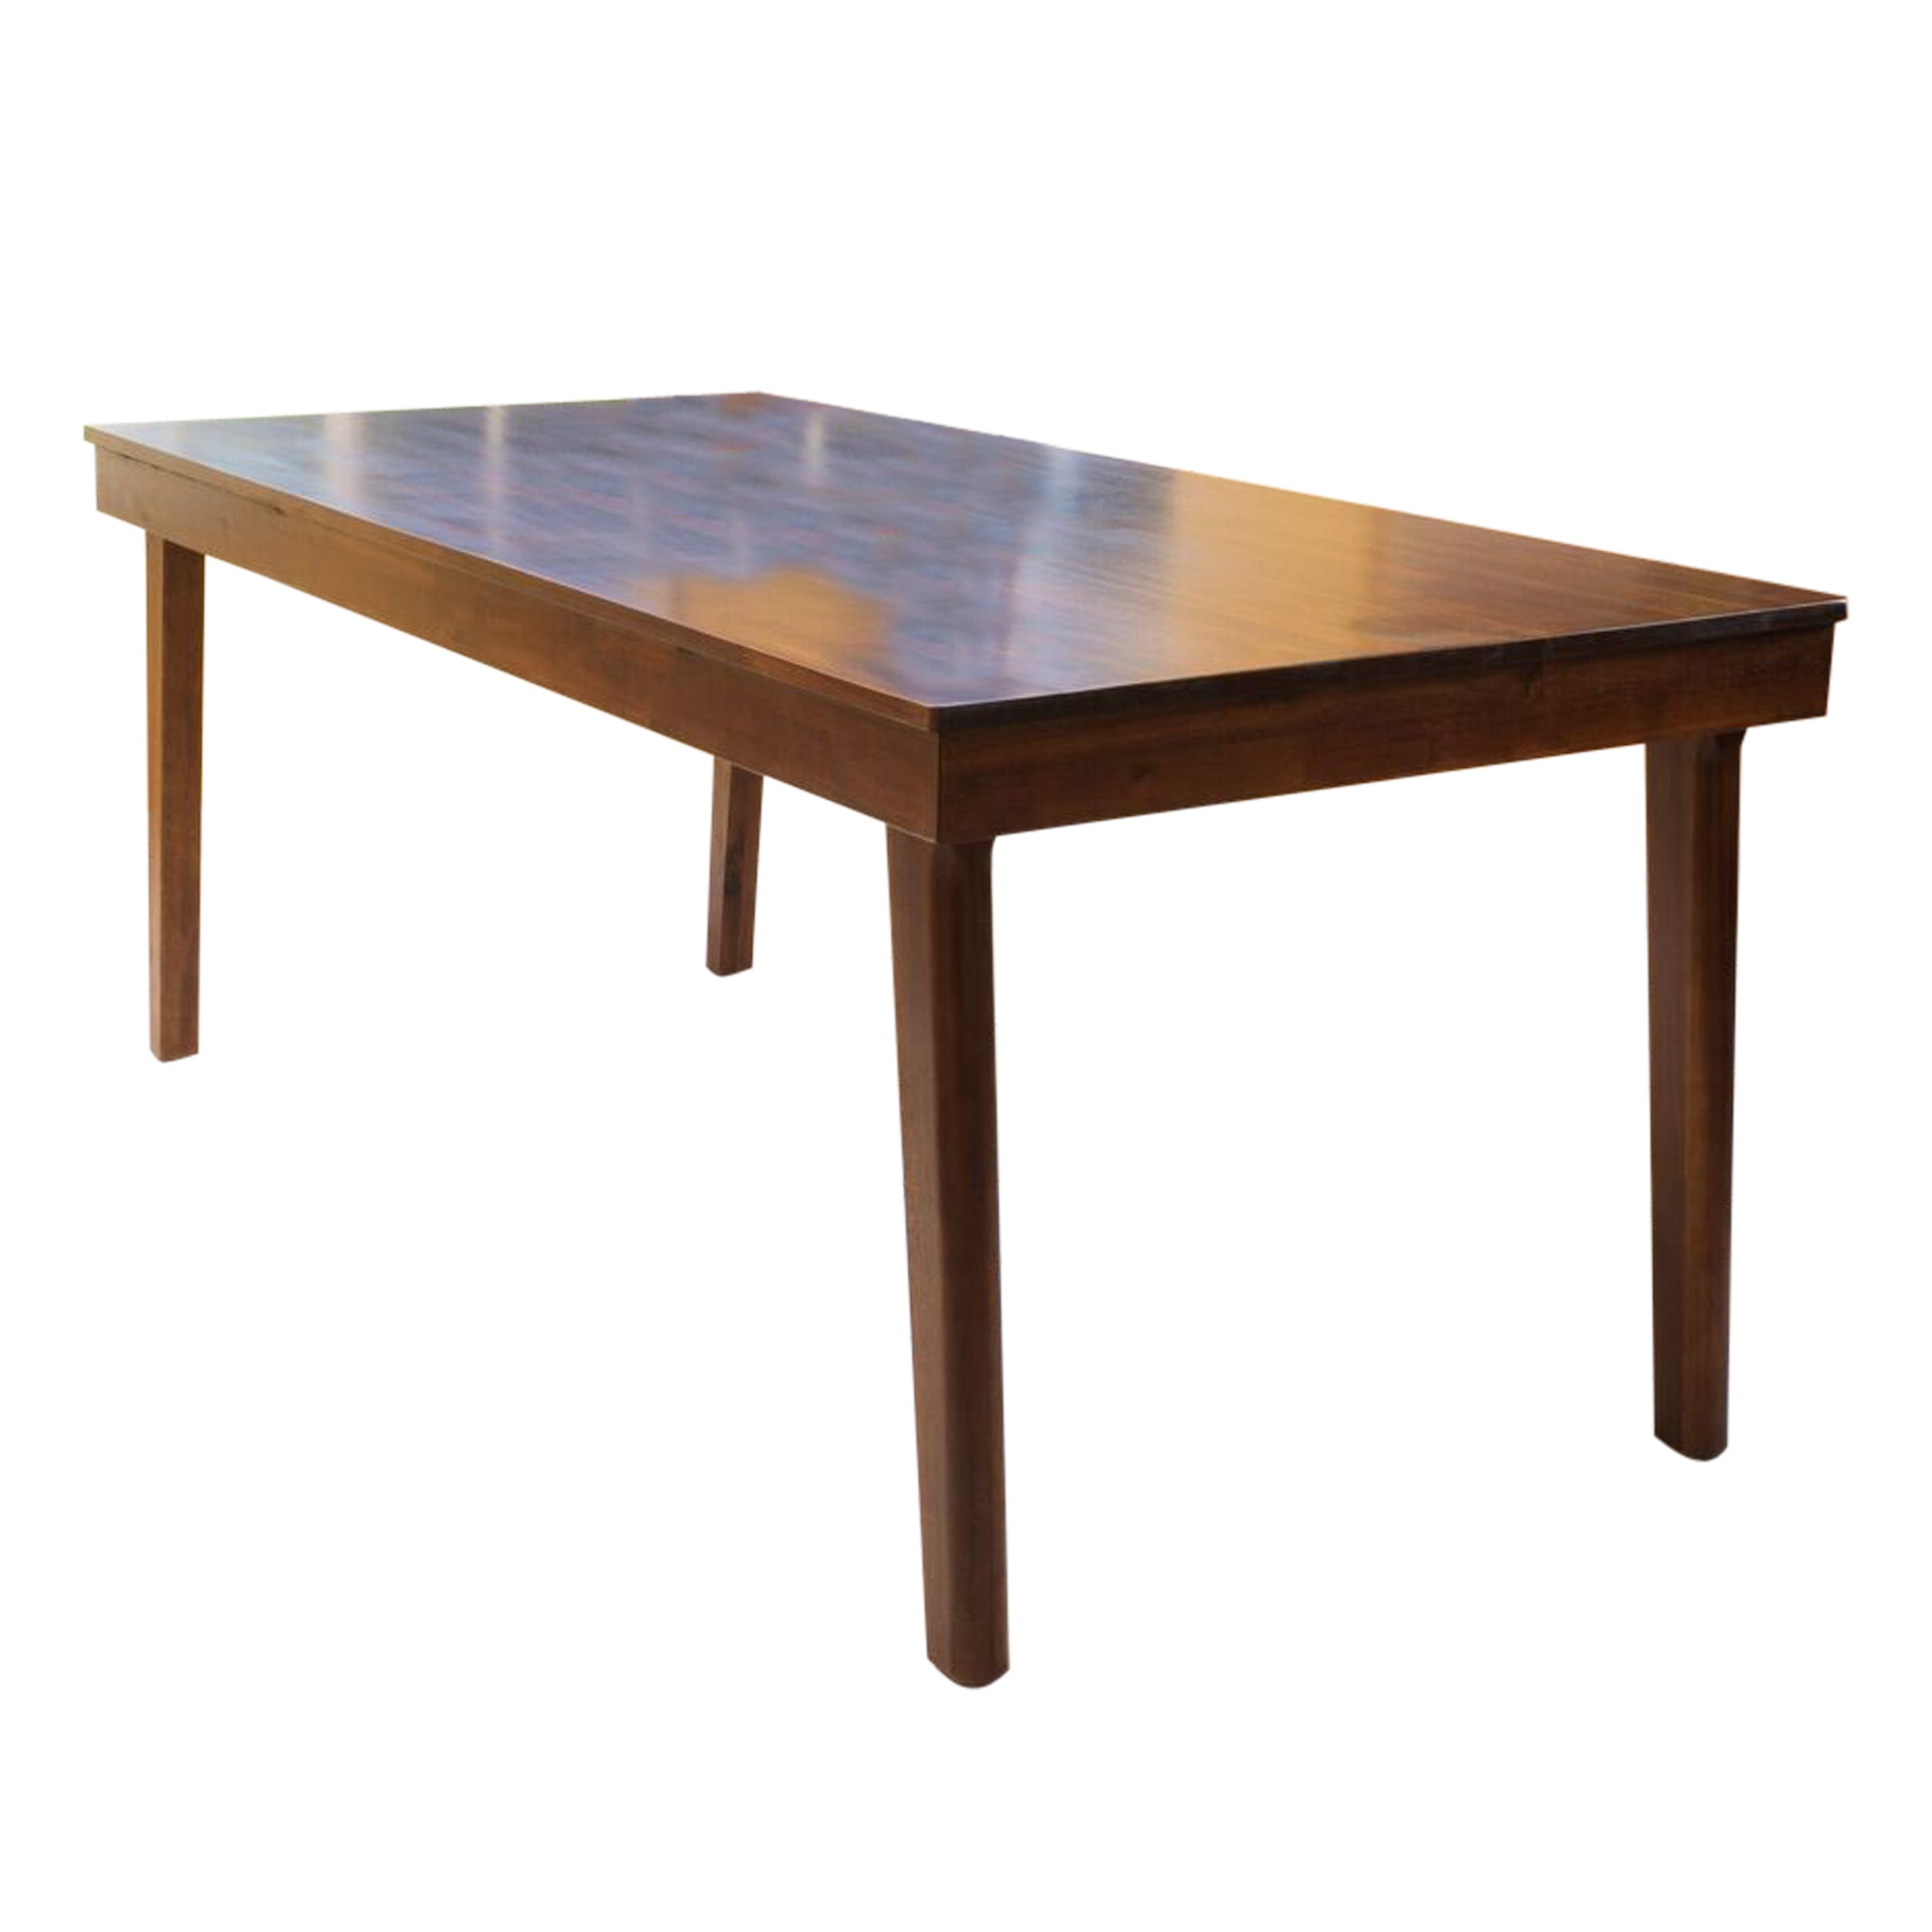 Adash Contemporary Mahogany Wood Dining Table Default Title